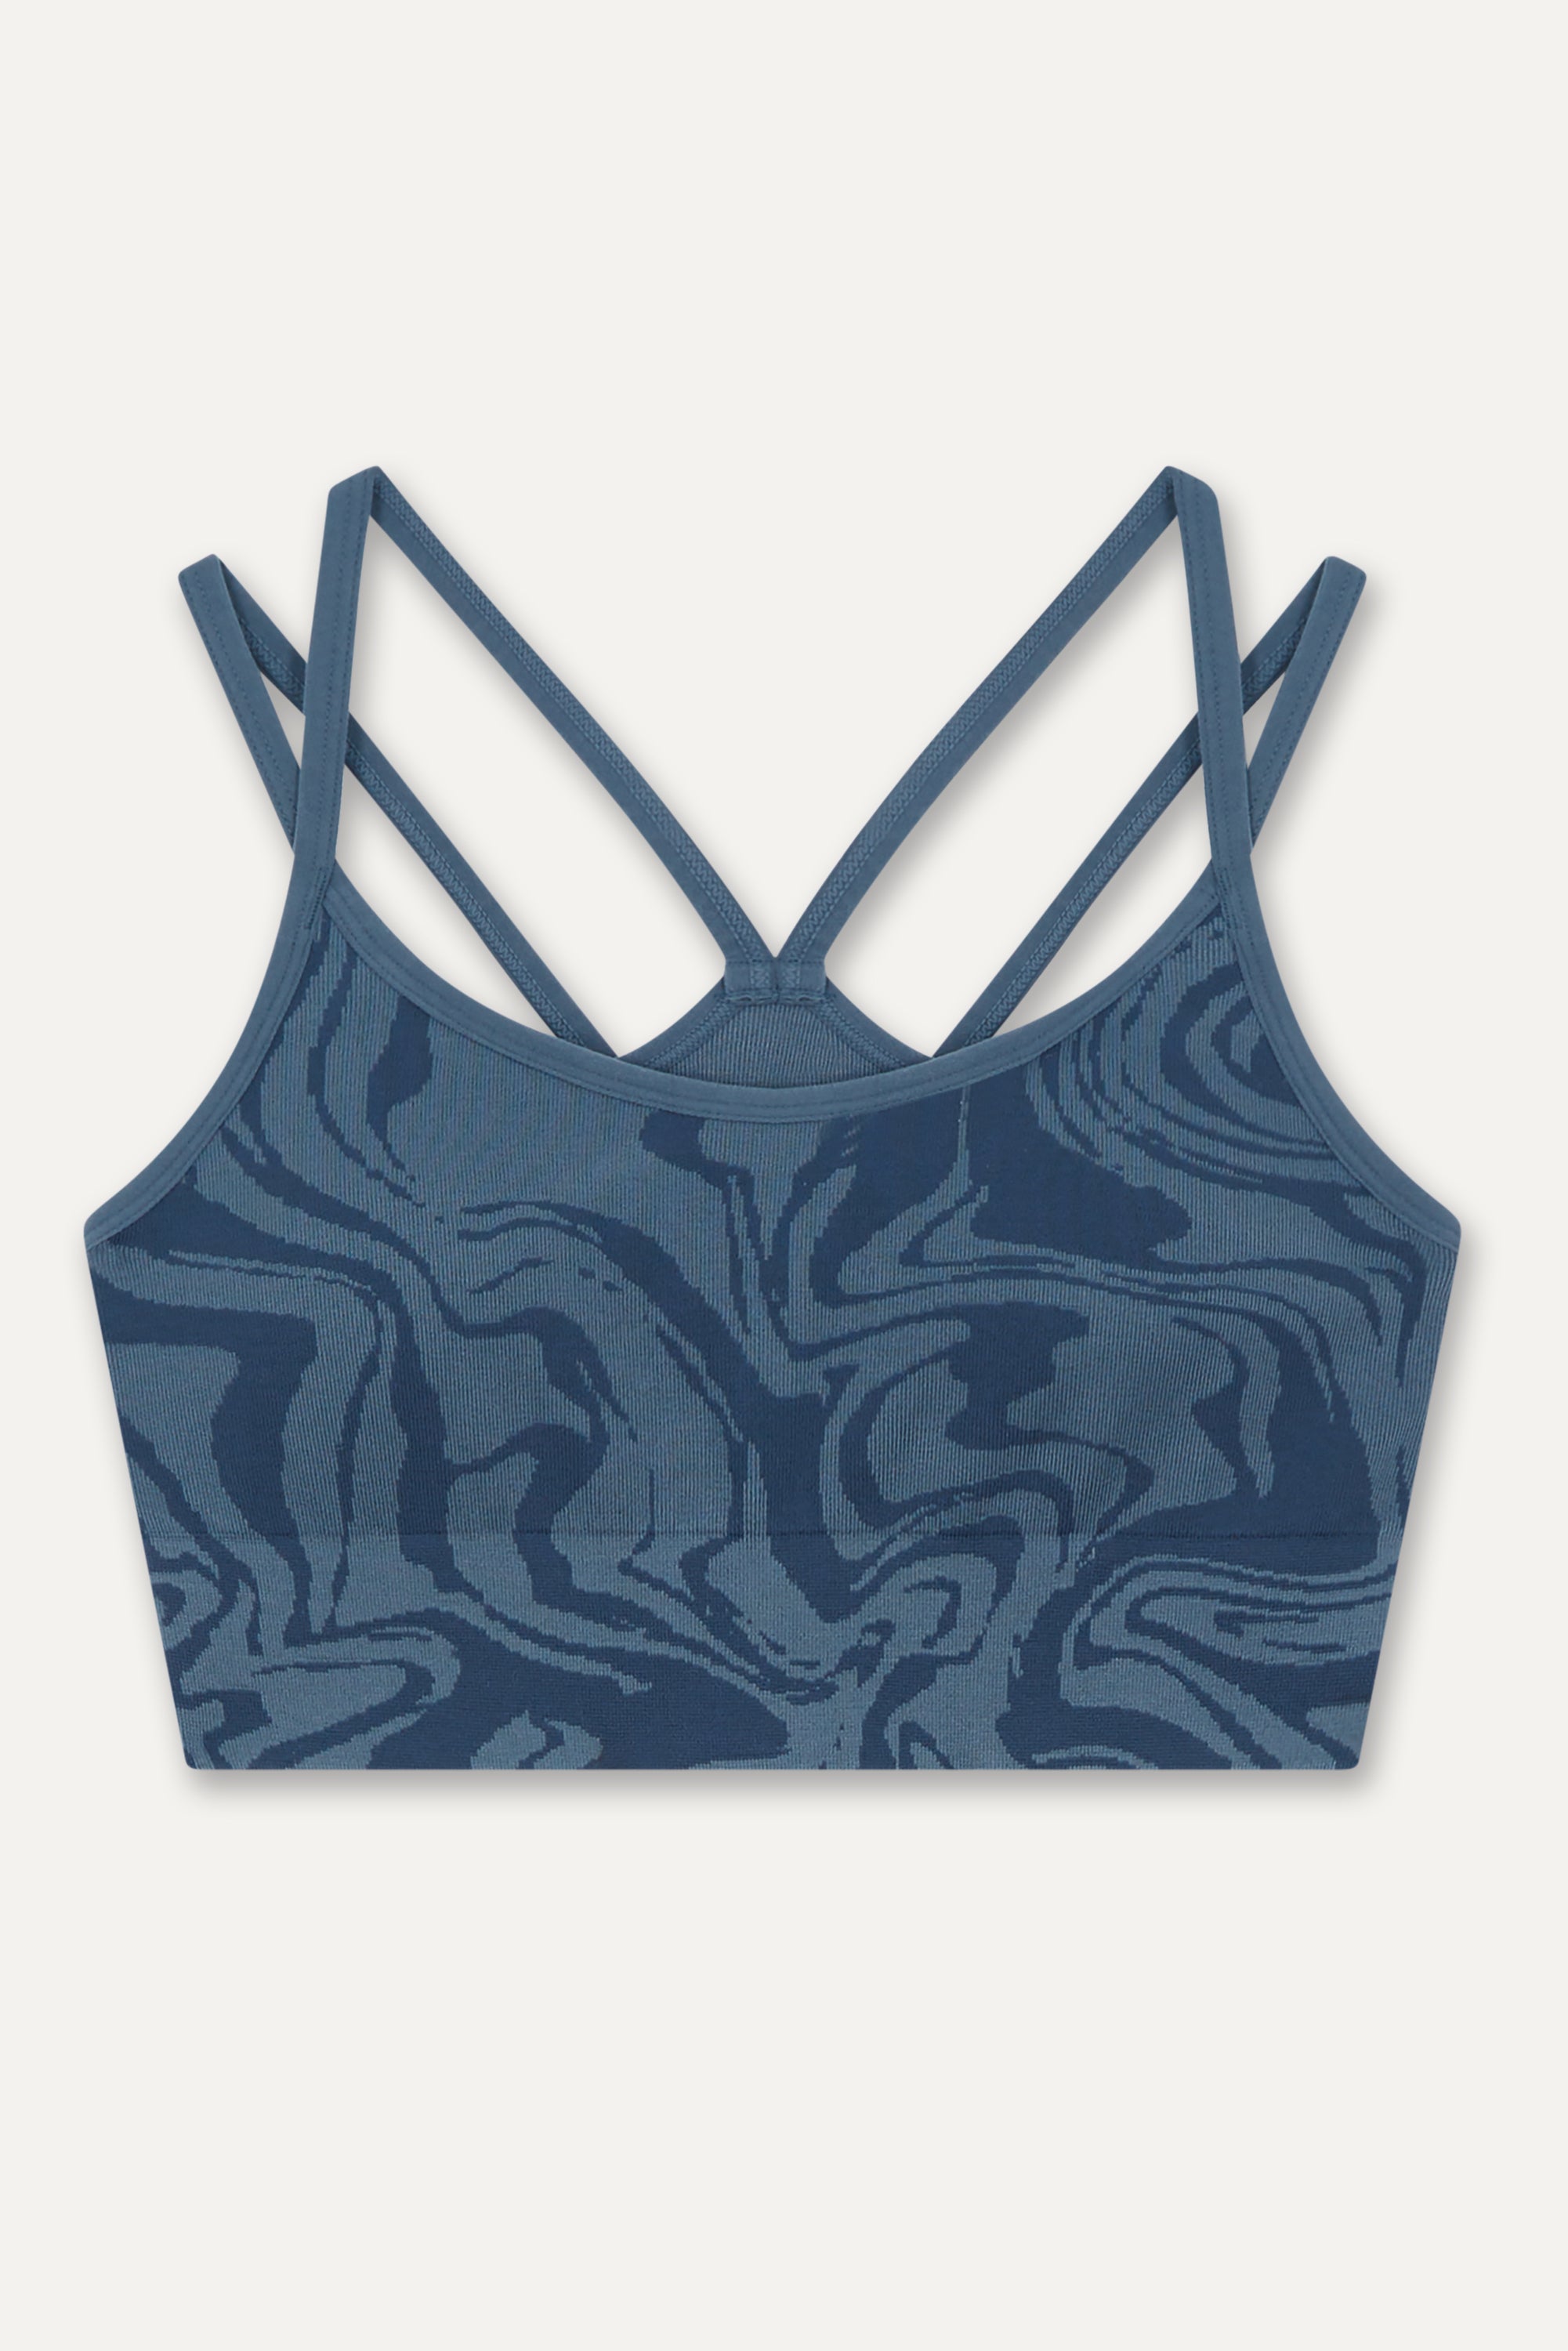 Denim blue recycled seamless marble print low to medium impact supportive sports bra for yoga, pilates, spinning, weights, running and exercise by sustainable activewear brand Jilla Active